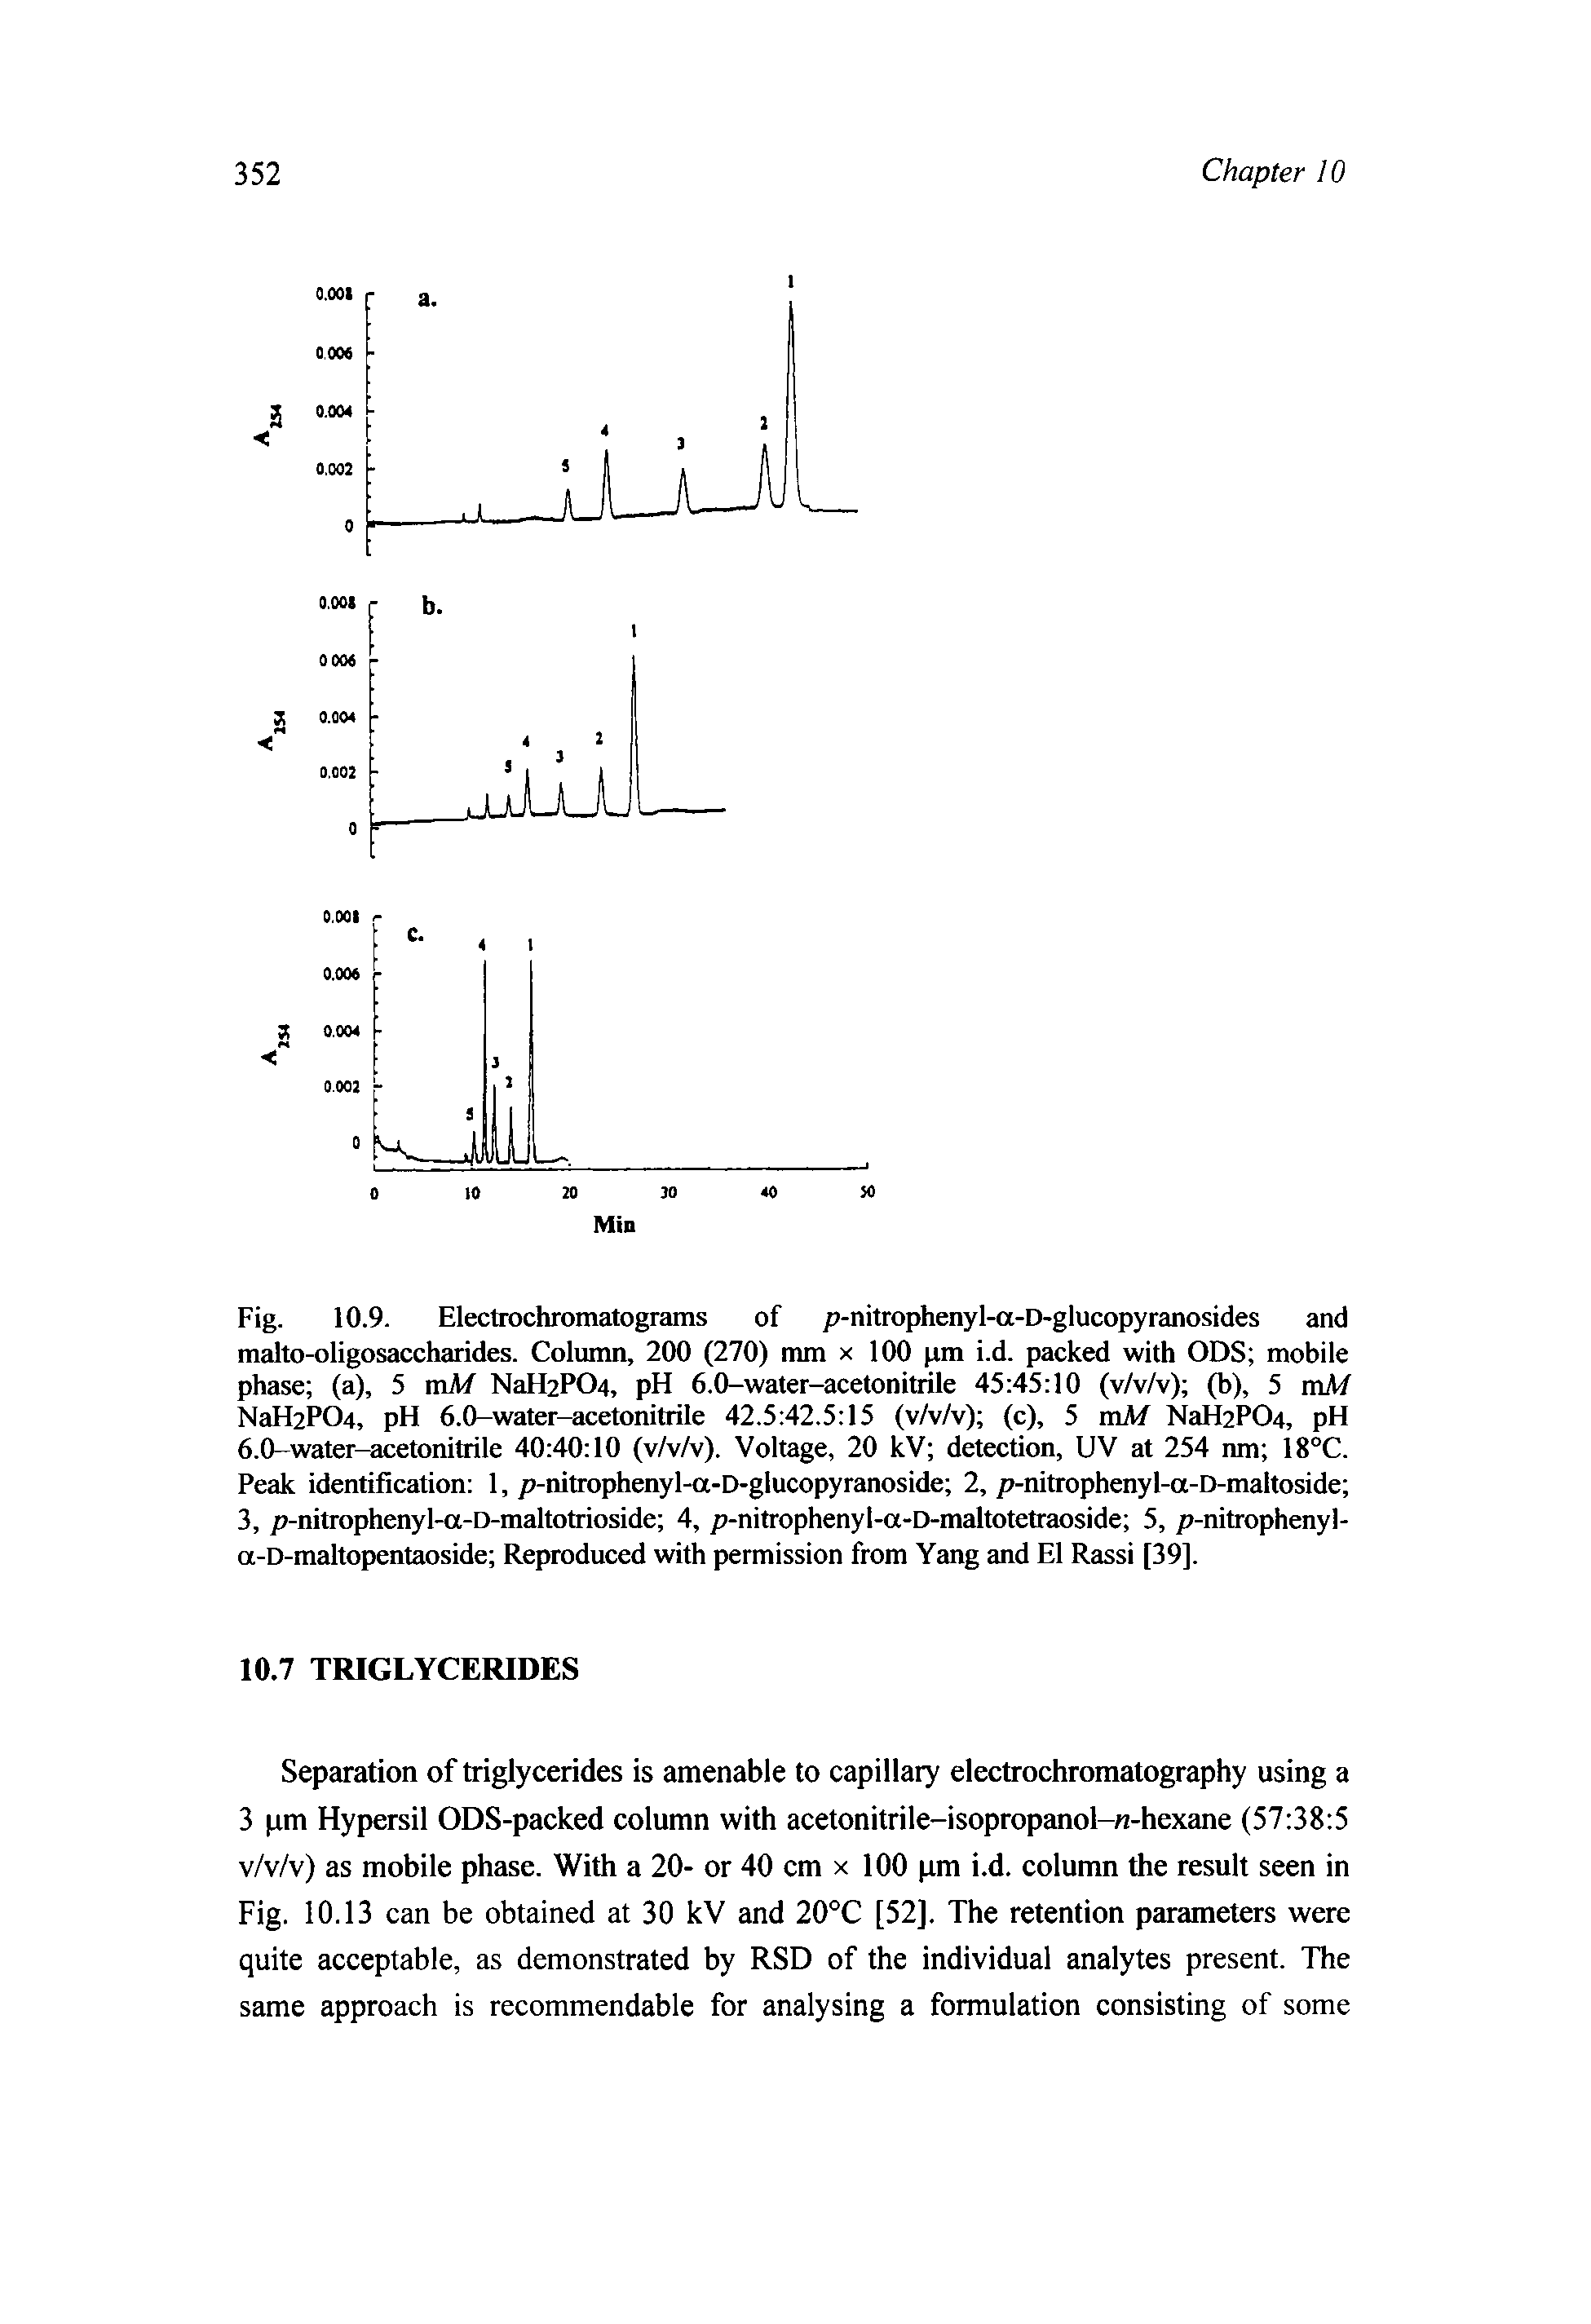 Fig. 10.9. Electrochromatograms of p-nitrophenyl-a-D-glucopyranosides and malto-oligosaccharides. Column, 200 (270) mm x 100 pm i.d. packed with ODS mobile phase (a), 5 mM NaH2PC>4, pH 6.0-water-acetonitrile 45 45 10 (v/v/v) (b), 5 mM NaH2P04, pH 6.0-water-acetonitrile 42.5 42.5 15 (v/v/v) (c), 5 mil/ NaFfePCU, pH 6.0-water-acetonitrile 40 40 10 (v/v/v). Voltage, 20 kV detection, UV at 254 nm 18°C. Peak identification 1, p-nitrophenyl-a-D-glucopyranoside 2, p-nitrophenyl-a-D-maltoside 3, p-nitrophenyl-a-D-maltotrioside 4, p-nitrophenyl-a-D-maltotctraoside 5, p-nitrophenyl-a-D-maltopentaoside Reproduced with permission from Yang and El Rassi [39].